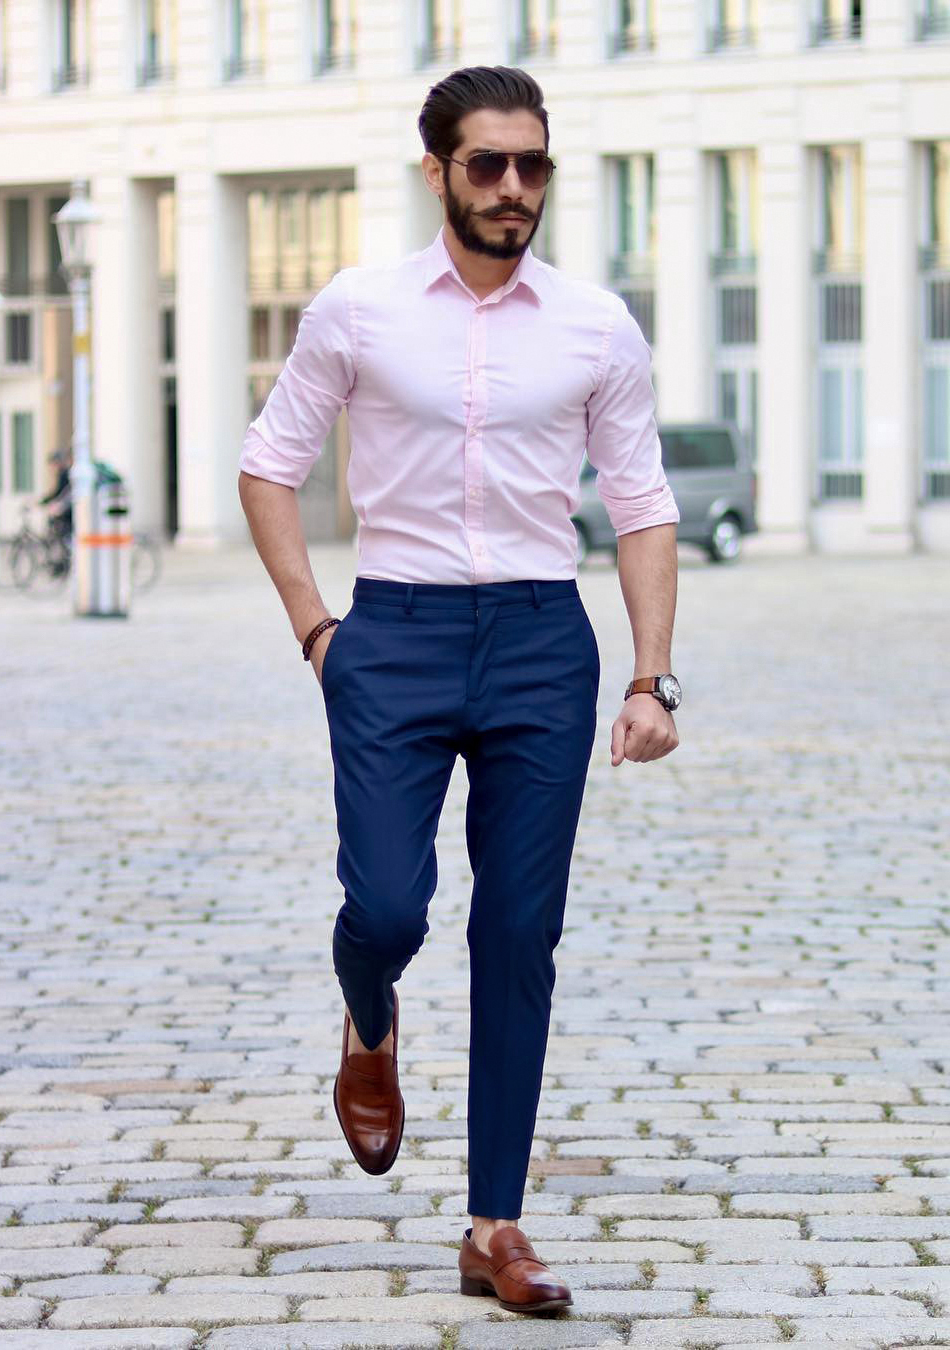 Pink dress shirt, navy chino pants, and brown loafers